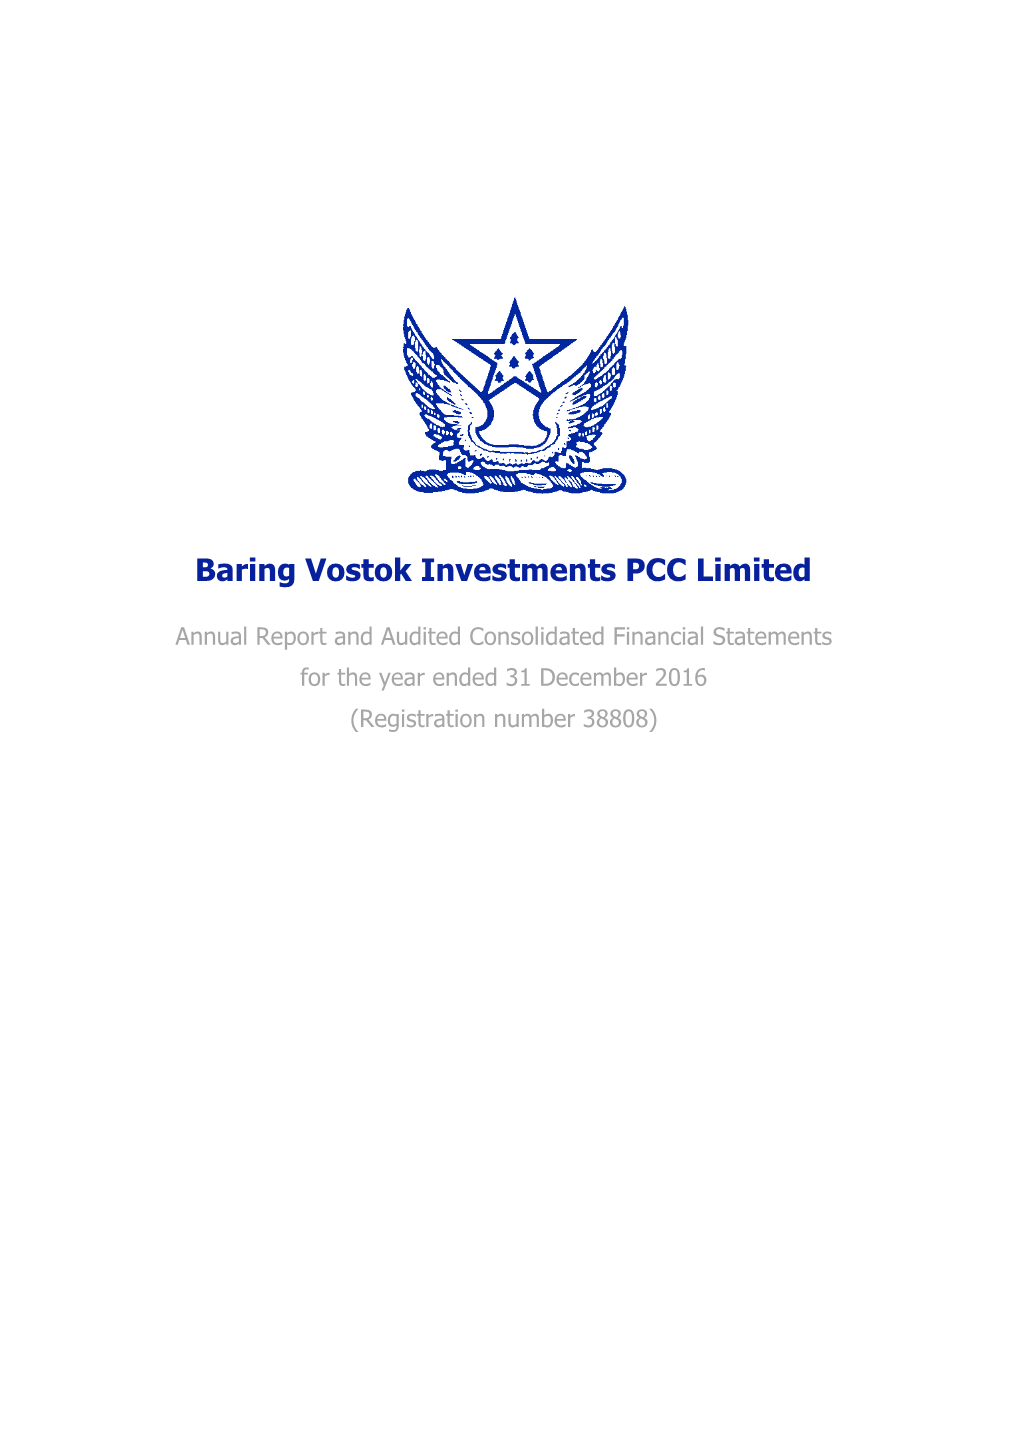 Baring Vostok Investments PCC Limited